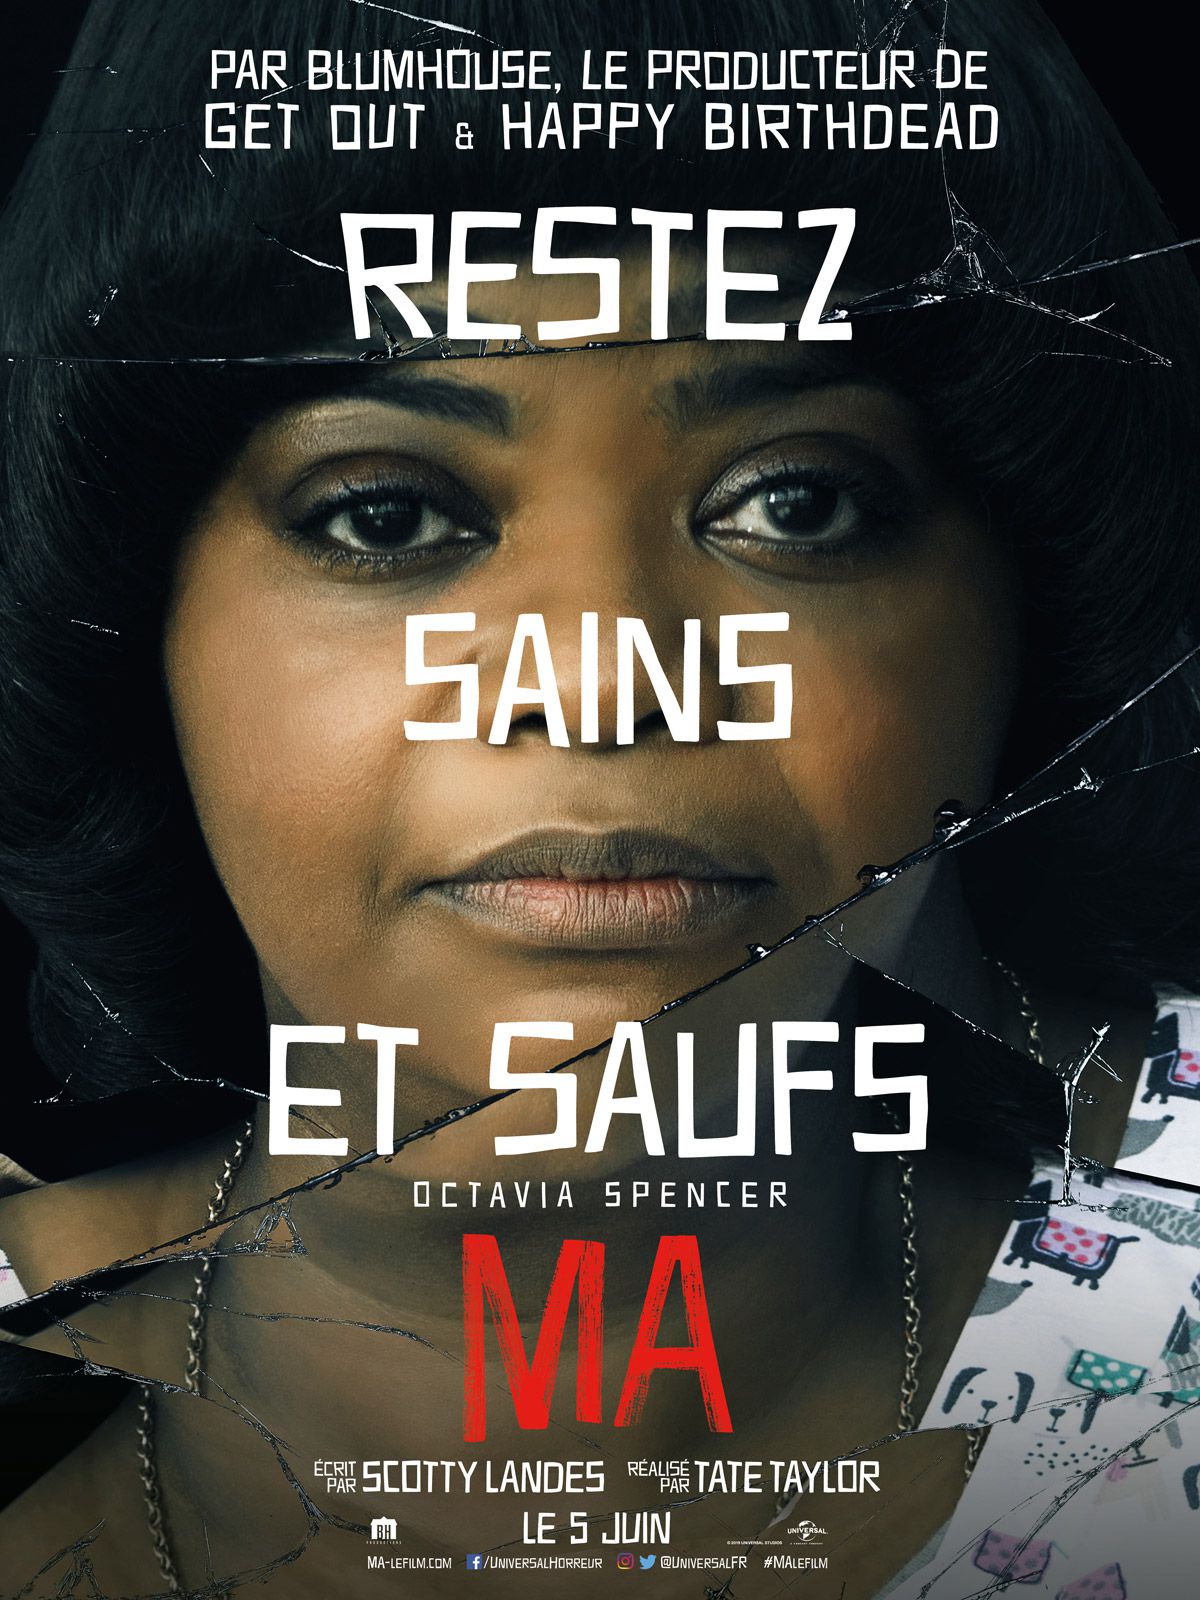 Ma - Film (2019) streaming VF gratuit complet